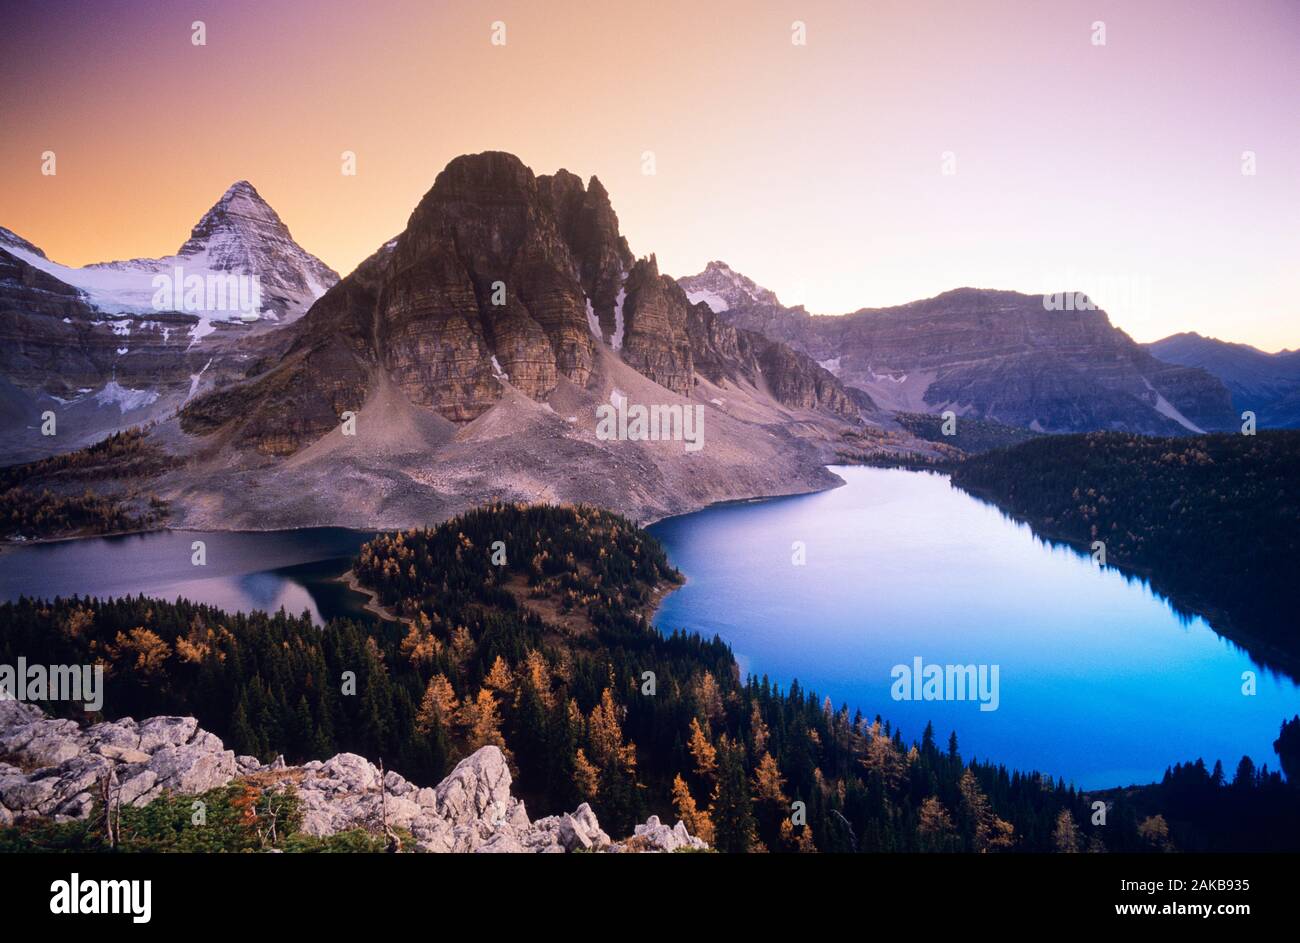 Landscape with Mount Assiniboine and Cerulean Lake at sunset, Mount Assiniboine National Park, British Columbia, Canada Stock Photo